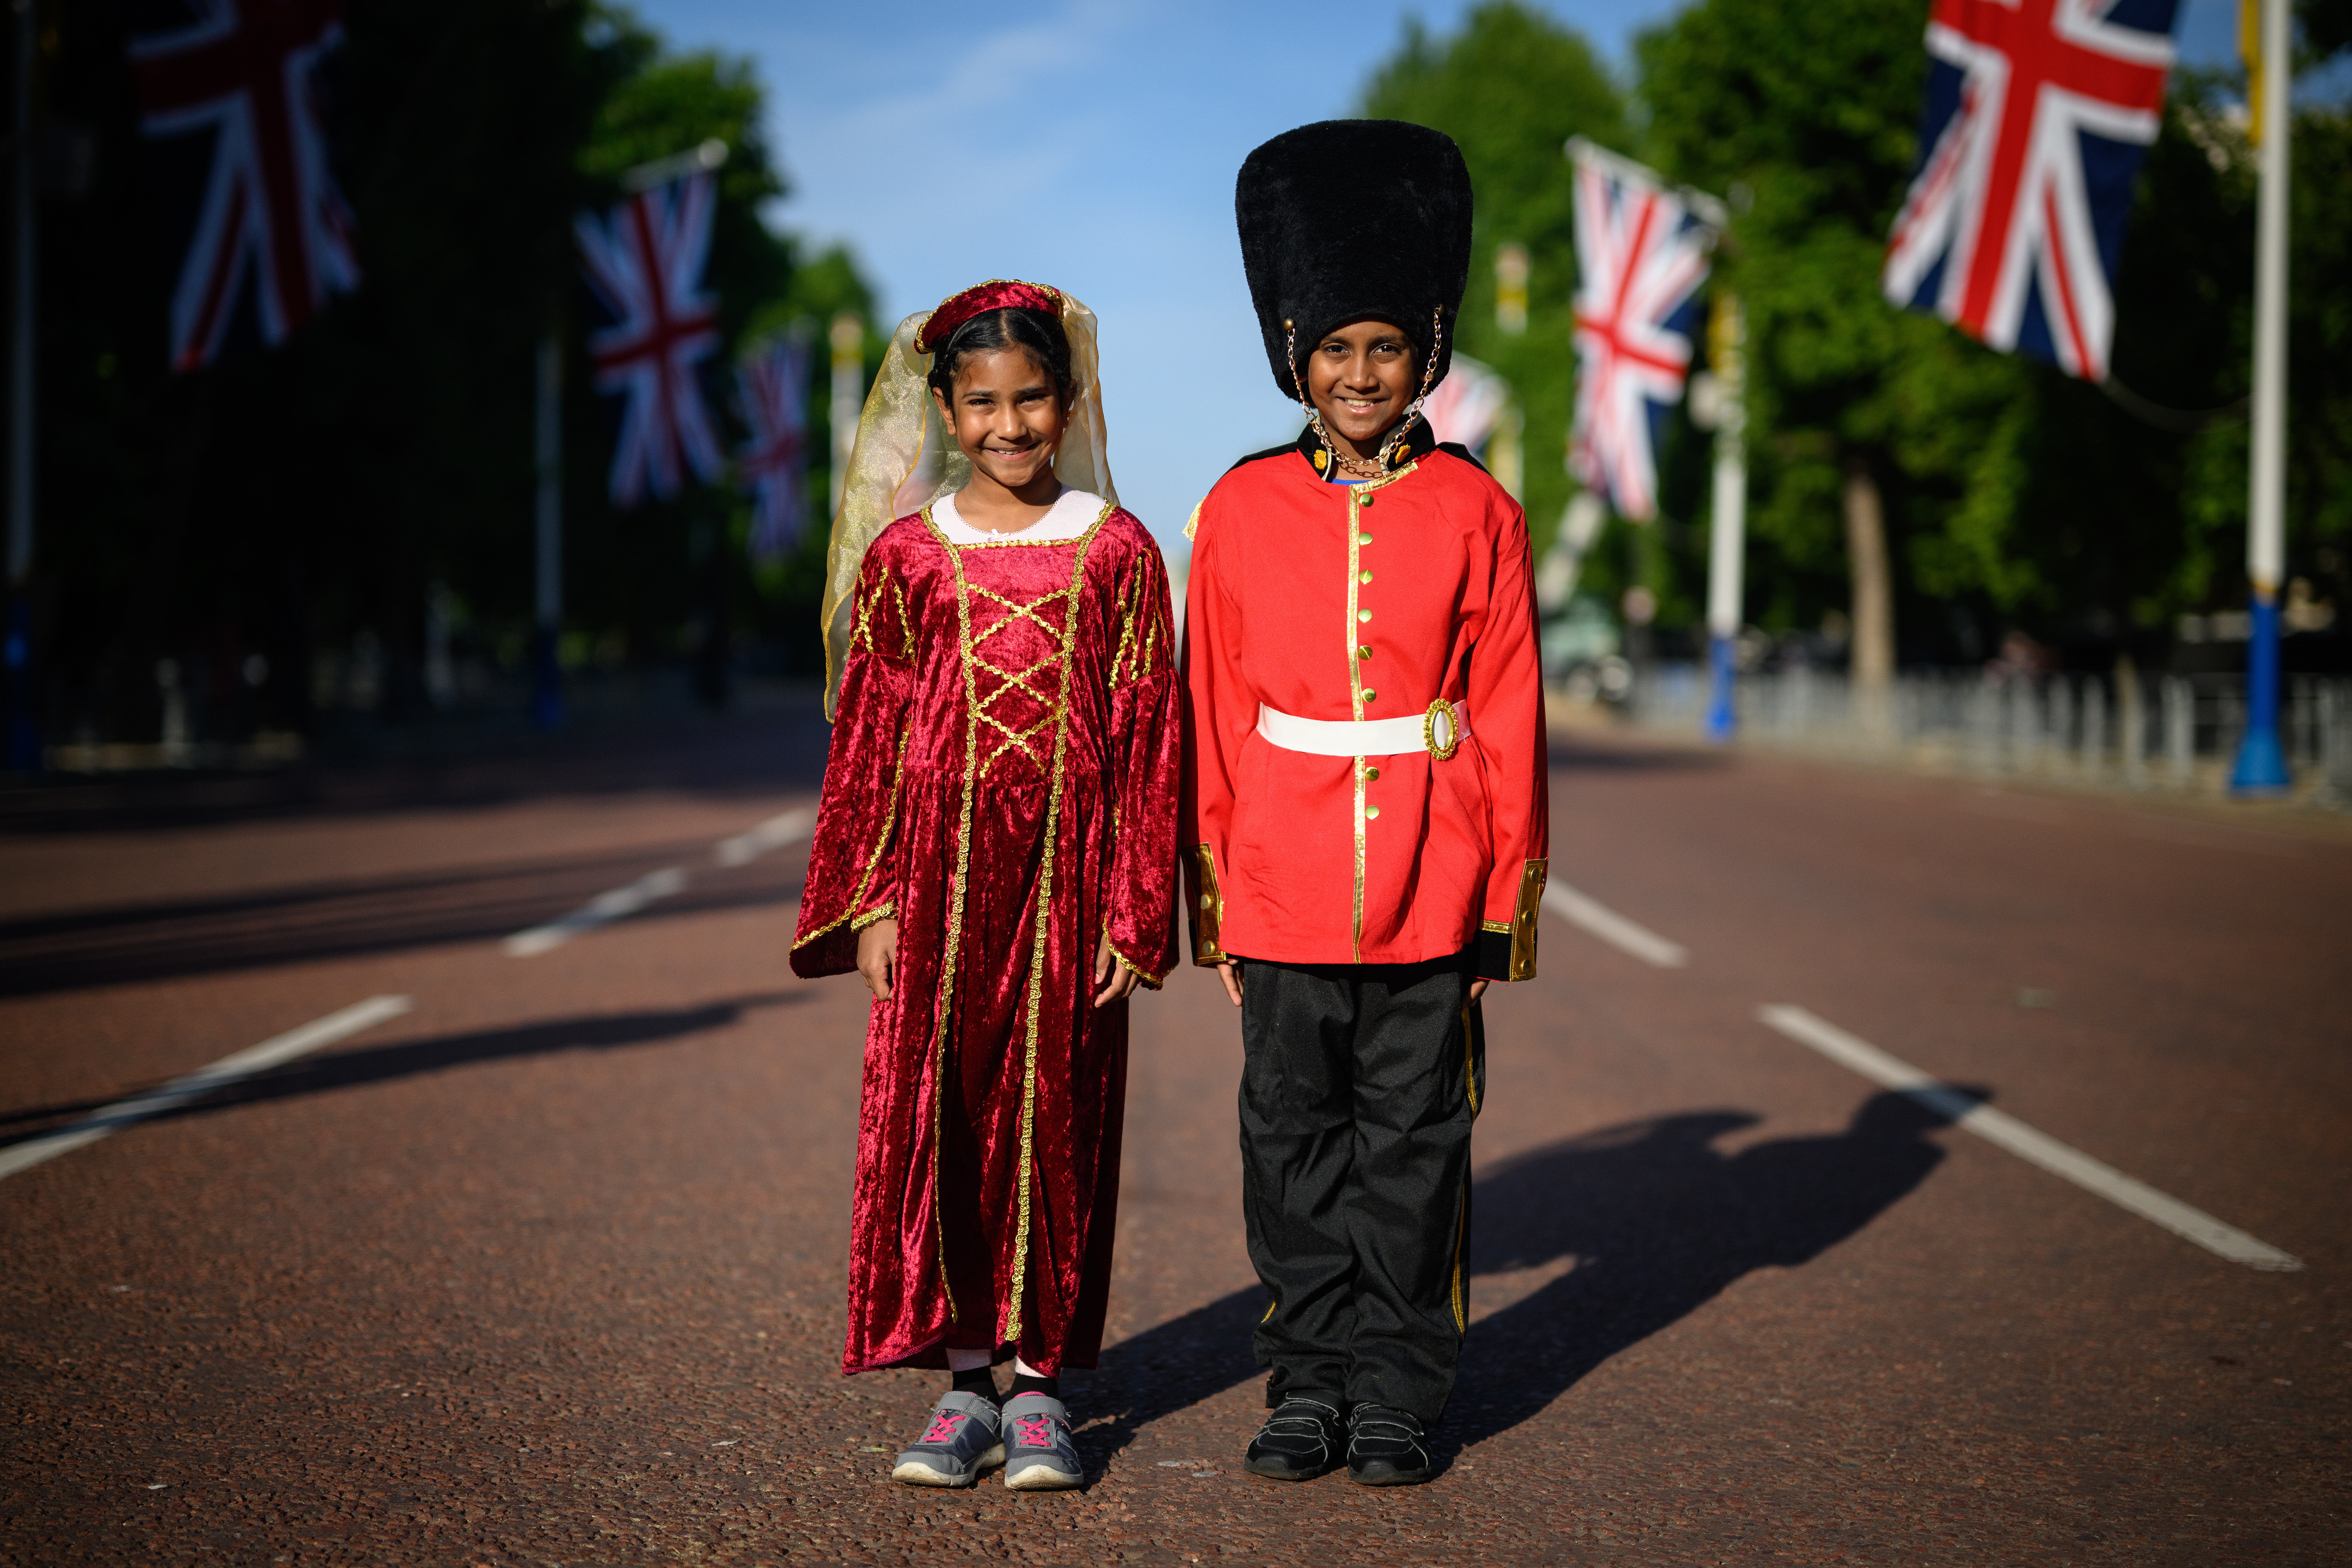 Royal fans Caellia (L) and Yoshilen wear costumes as they arrive on the Mall to celebrate the first day of celebrations to mark the Platinum Jubilee of Queen Elizabeth II, on June 02